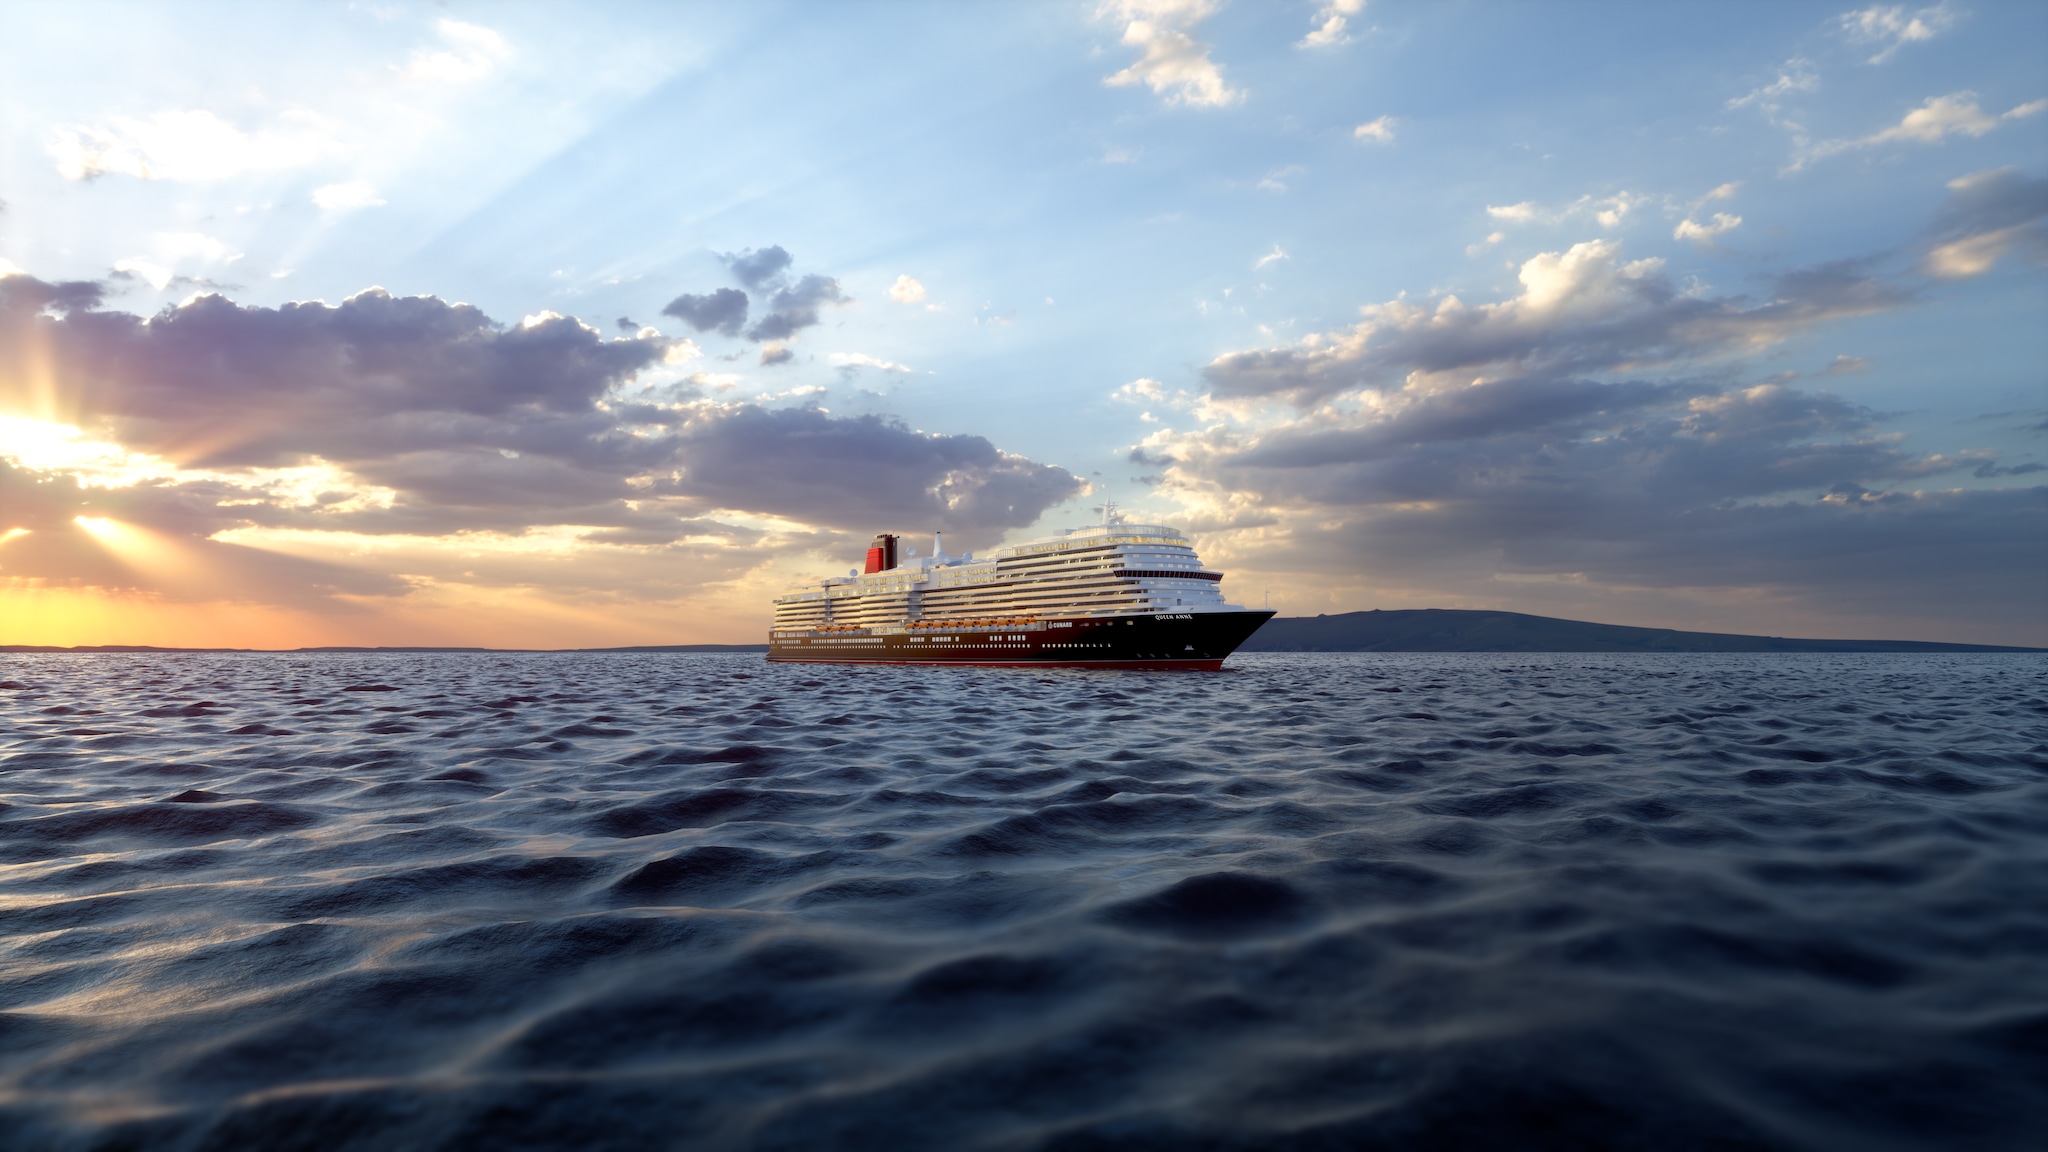 cunard fly cruise packages